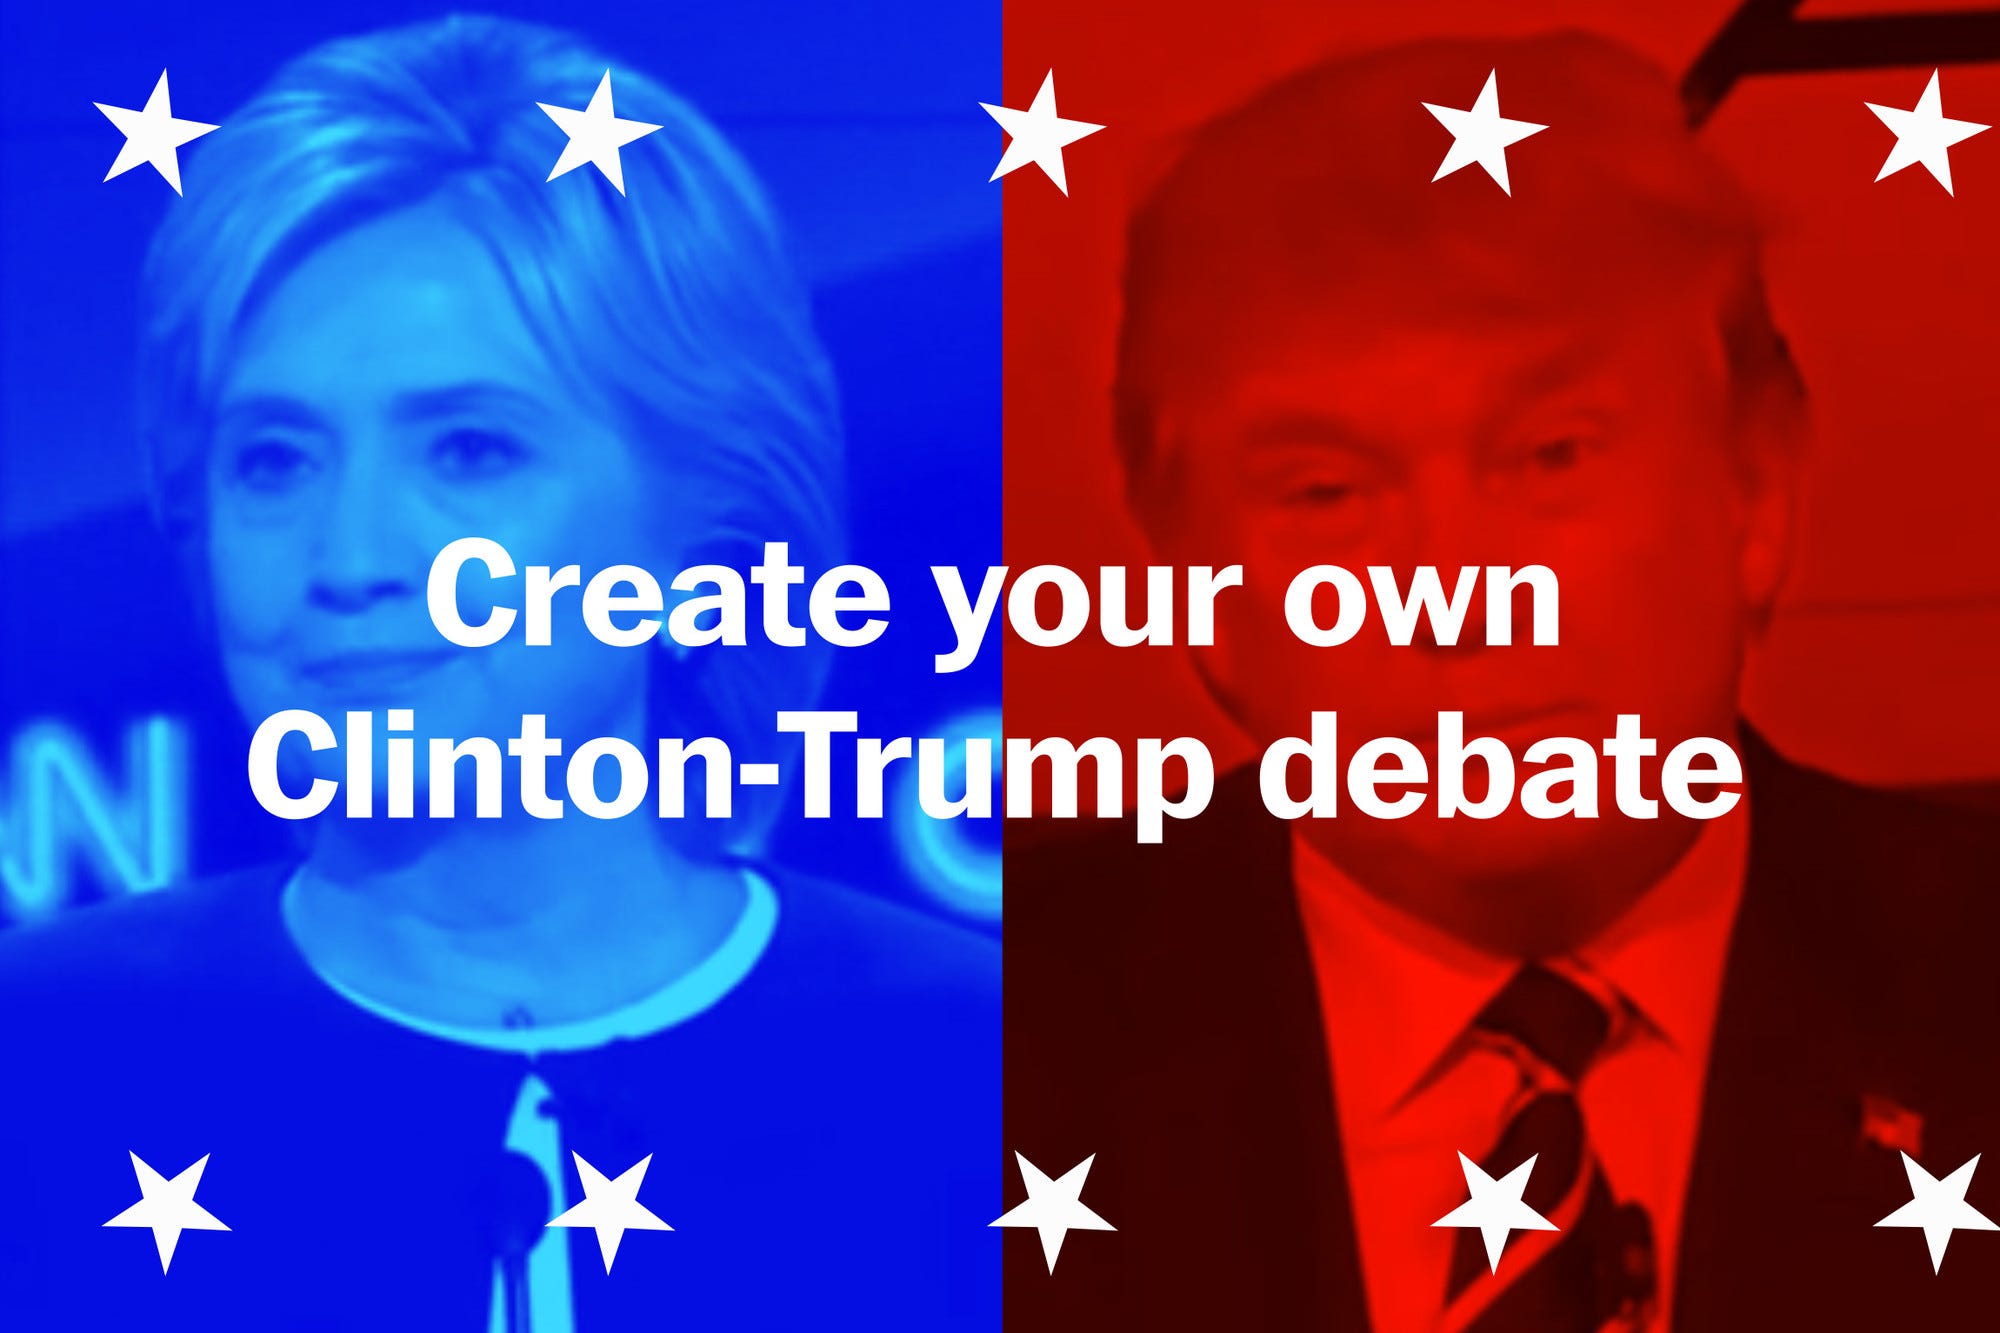 《We simulated a Clinton-Trump debate, and now you get to choose the questions》－ 華盛頓郵報